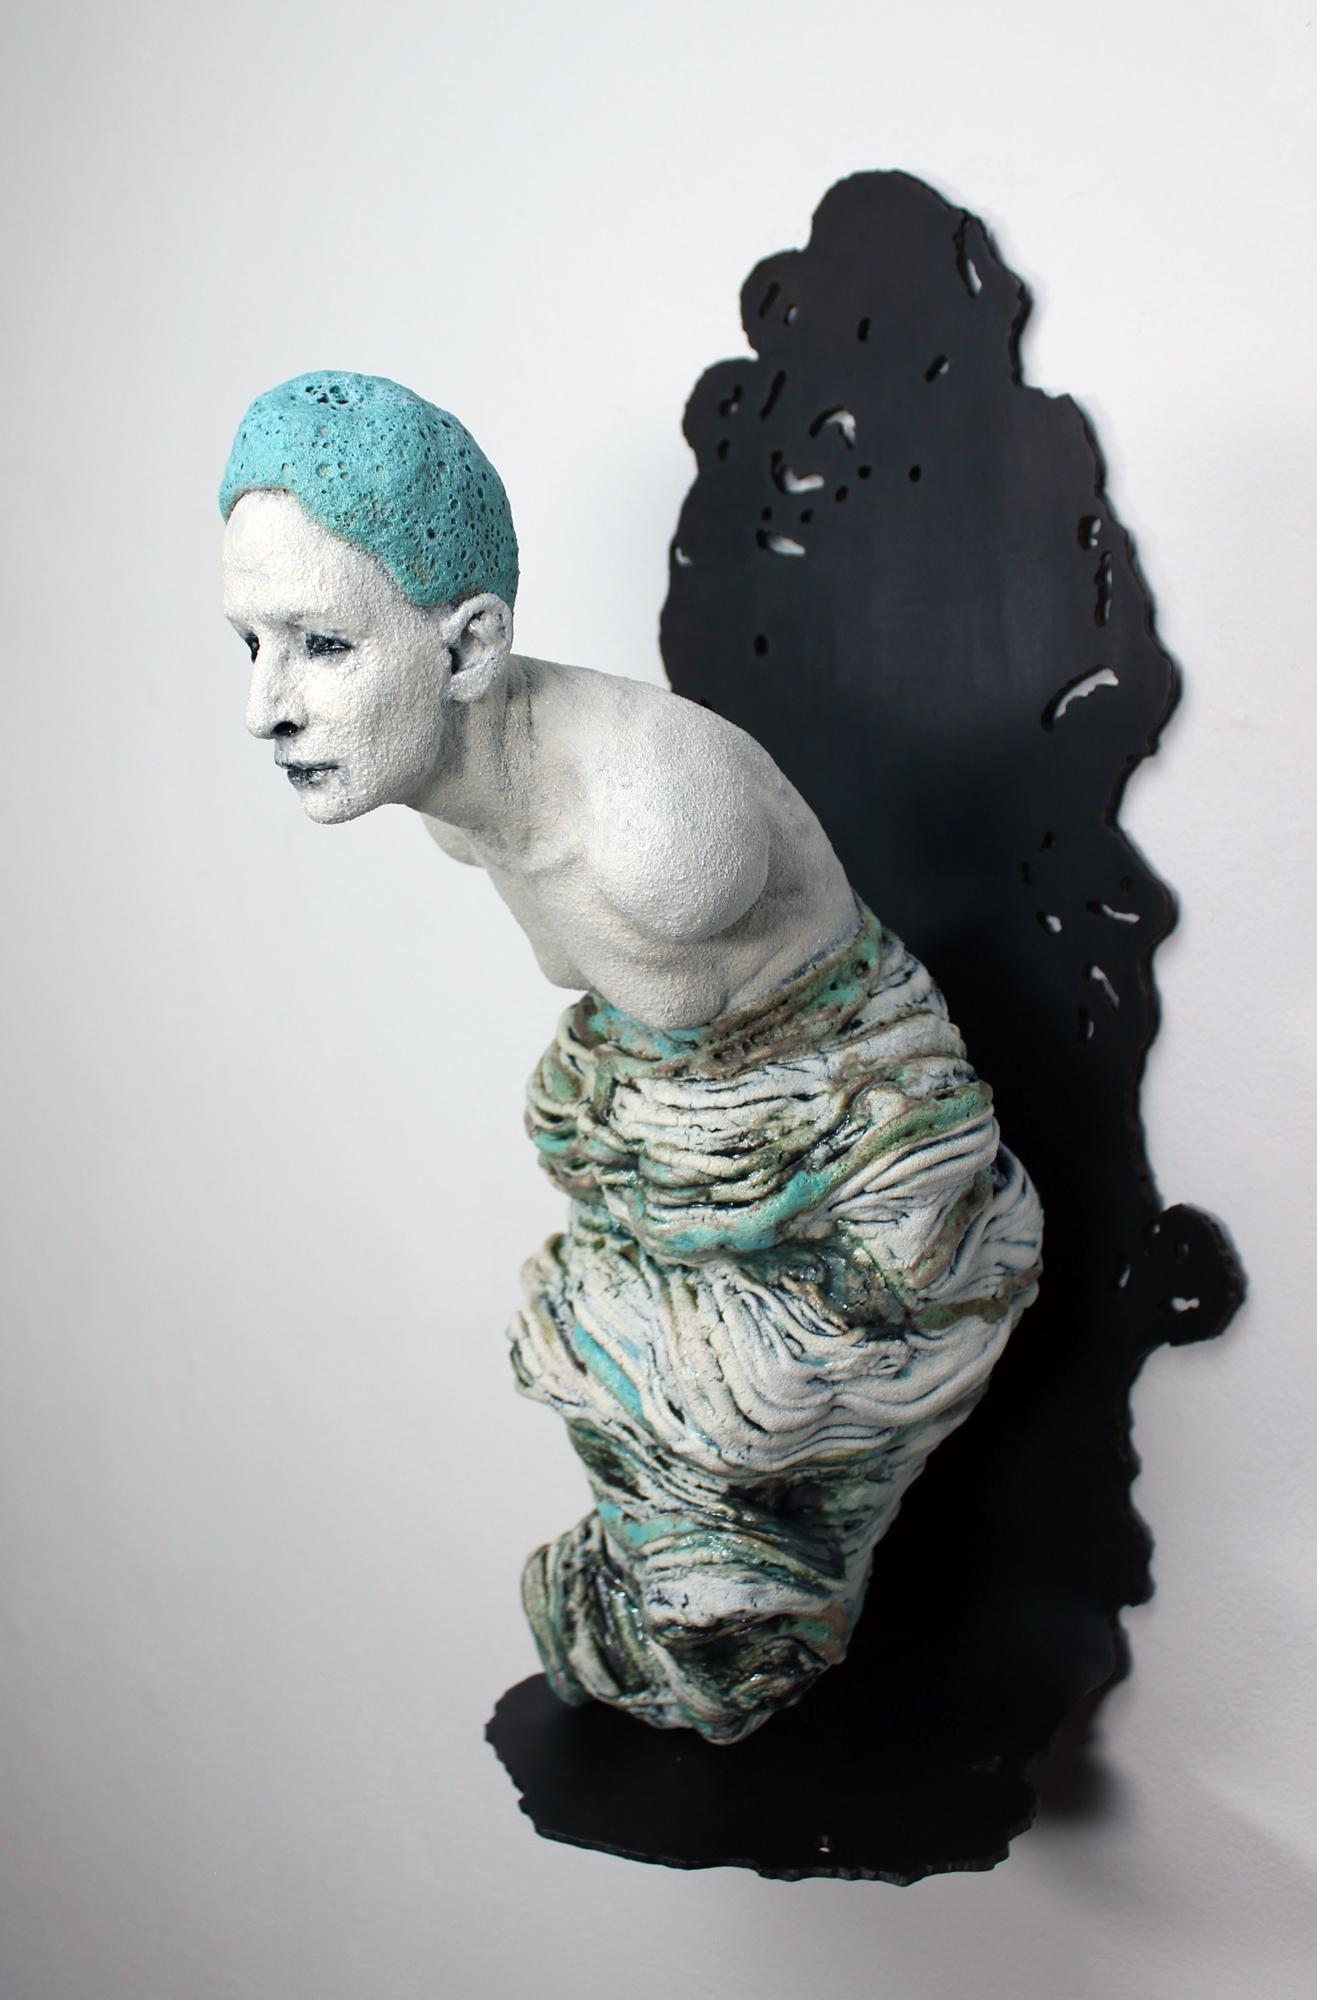 This blue, white, and grey figurative sculpture titled 